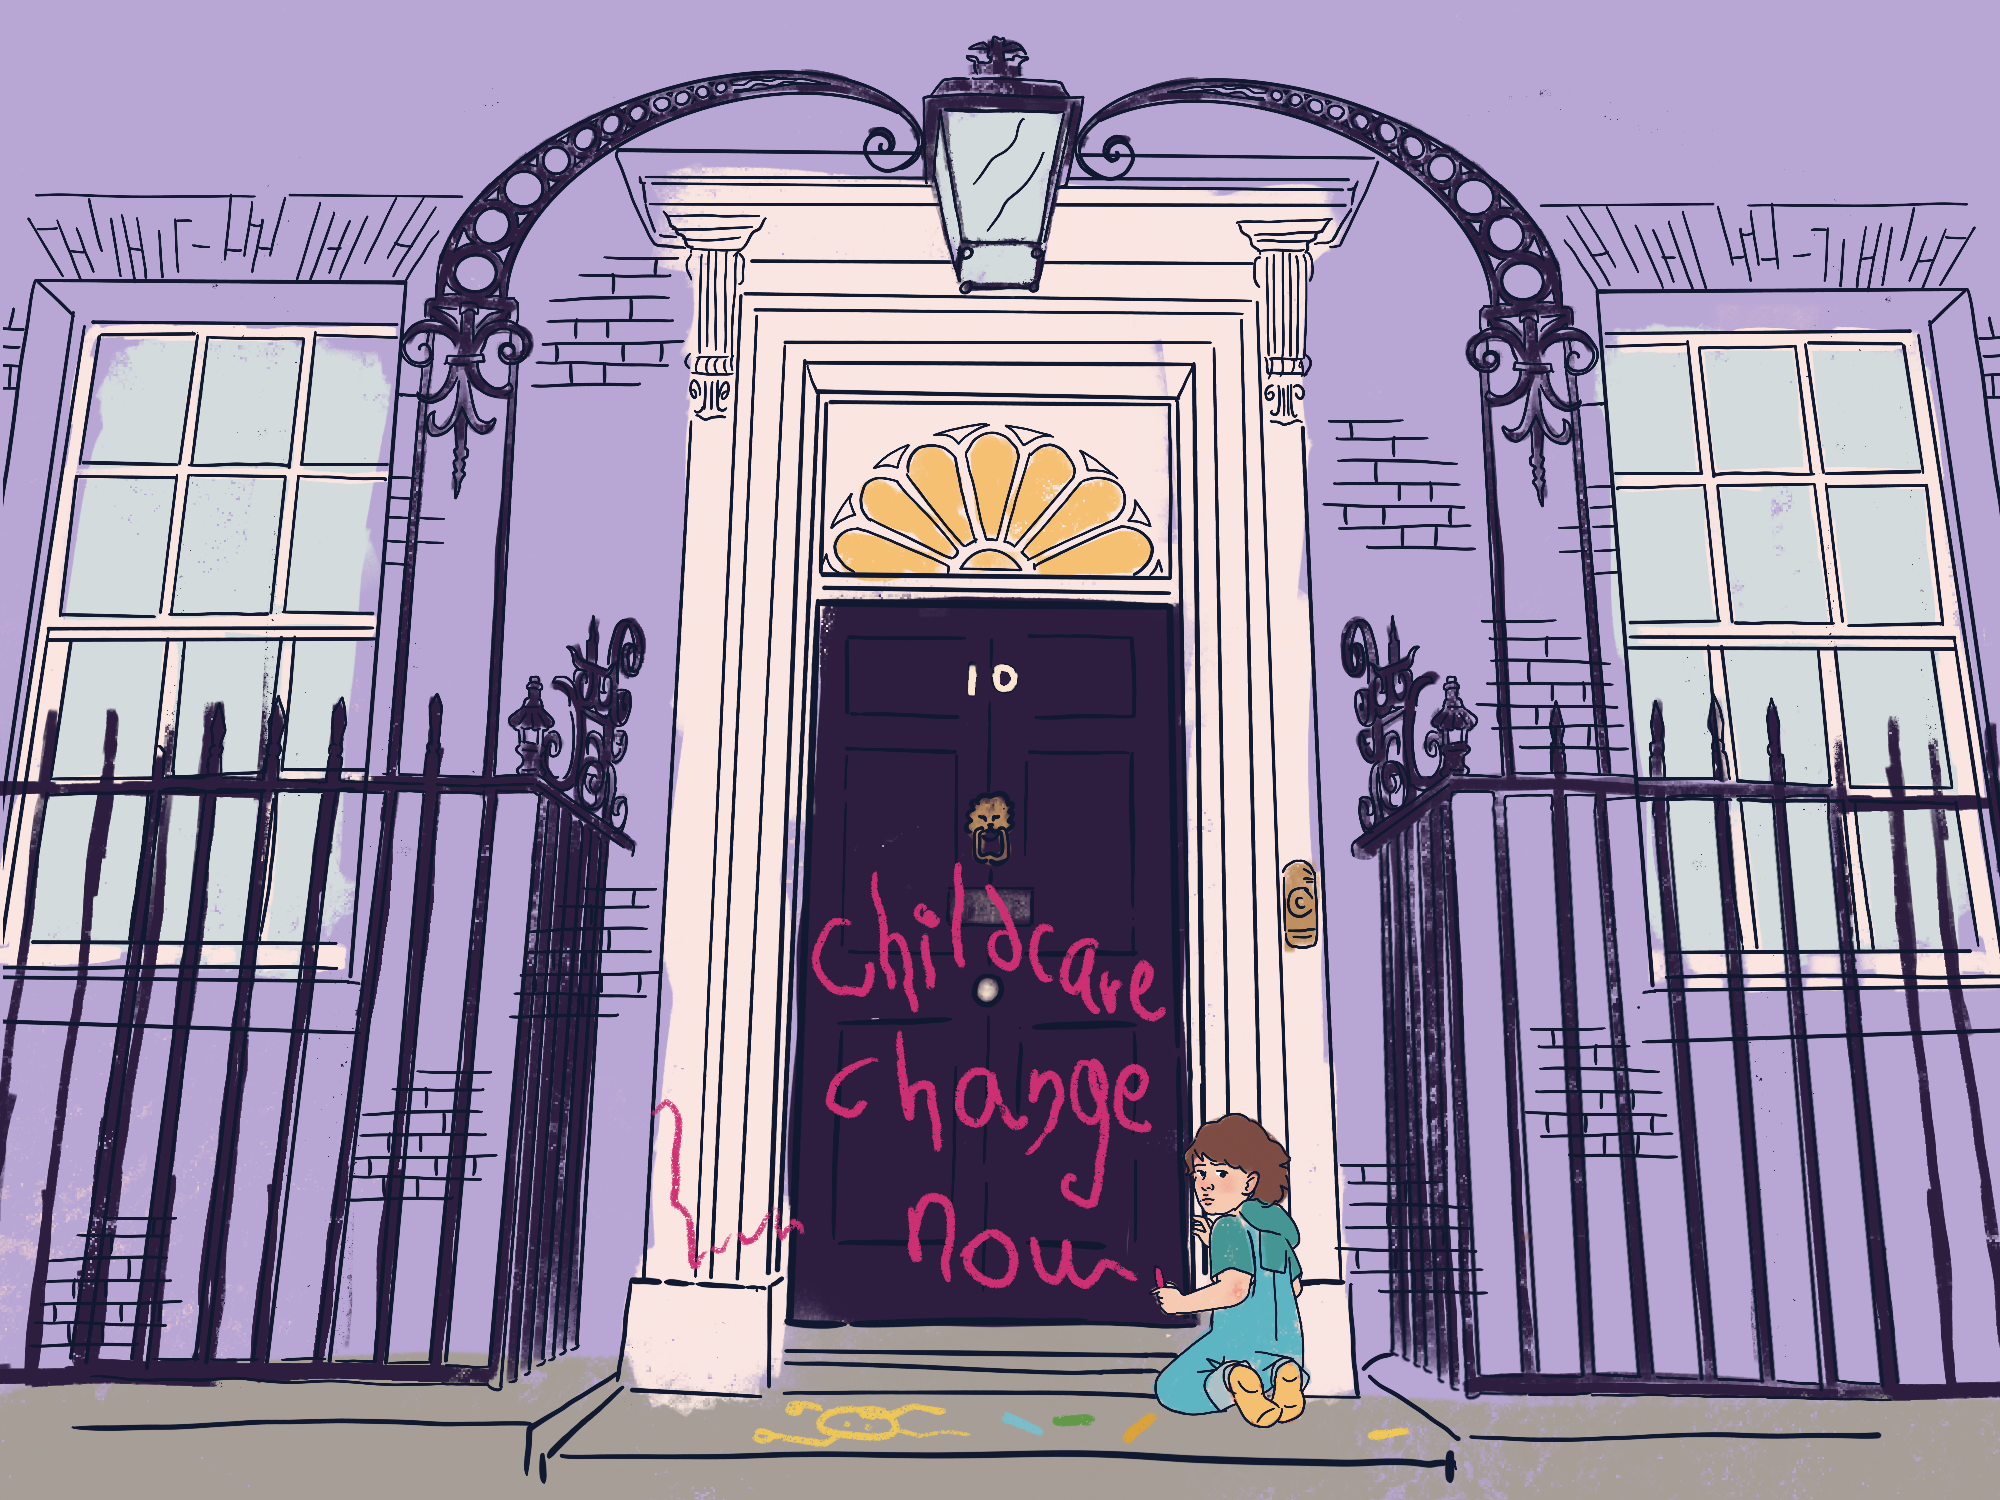 Image description: illustration of No.10 Downing street entrance with a child kneeling on the front step writing 